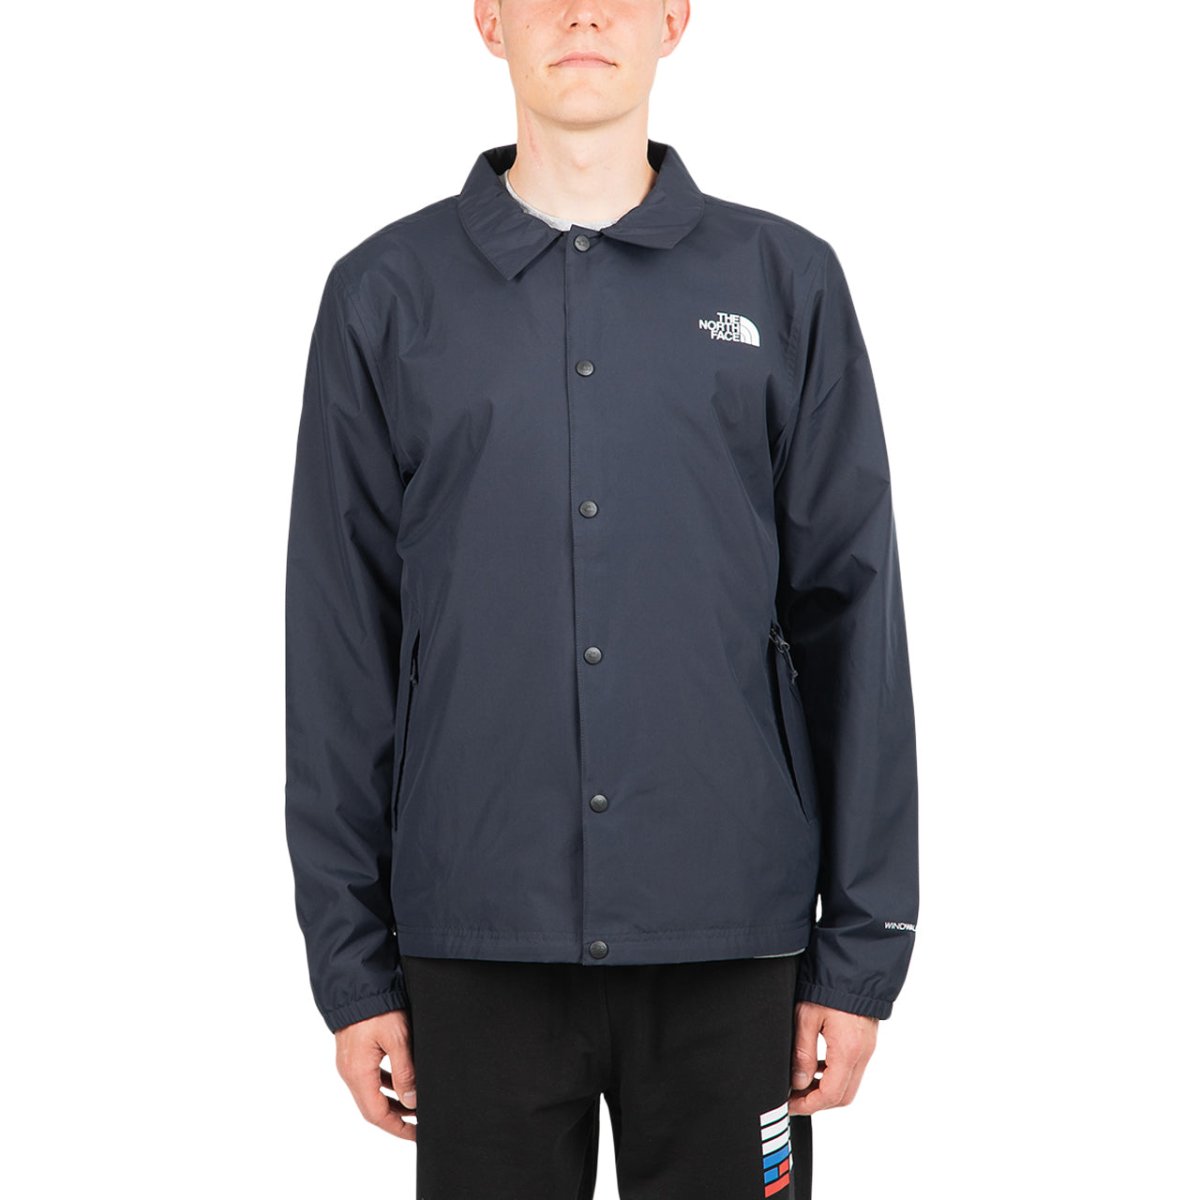 Image of The North Face International Collection Coach Jacket (Navy)